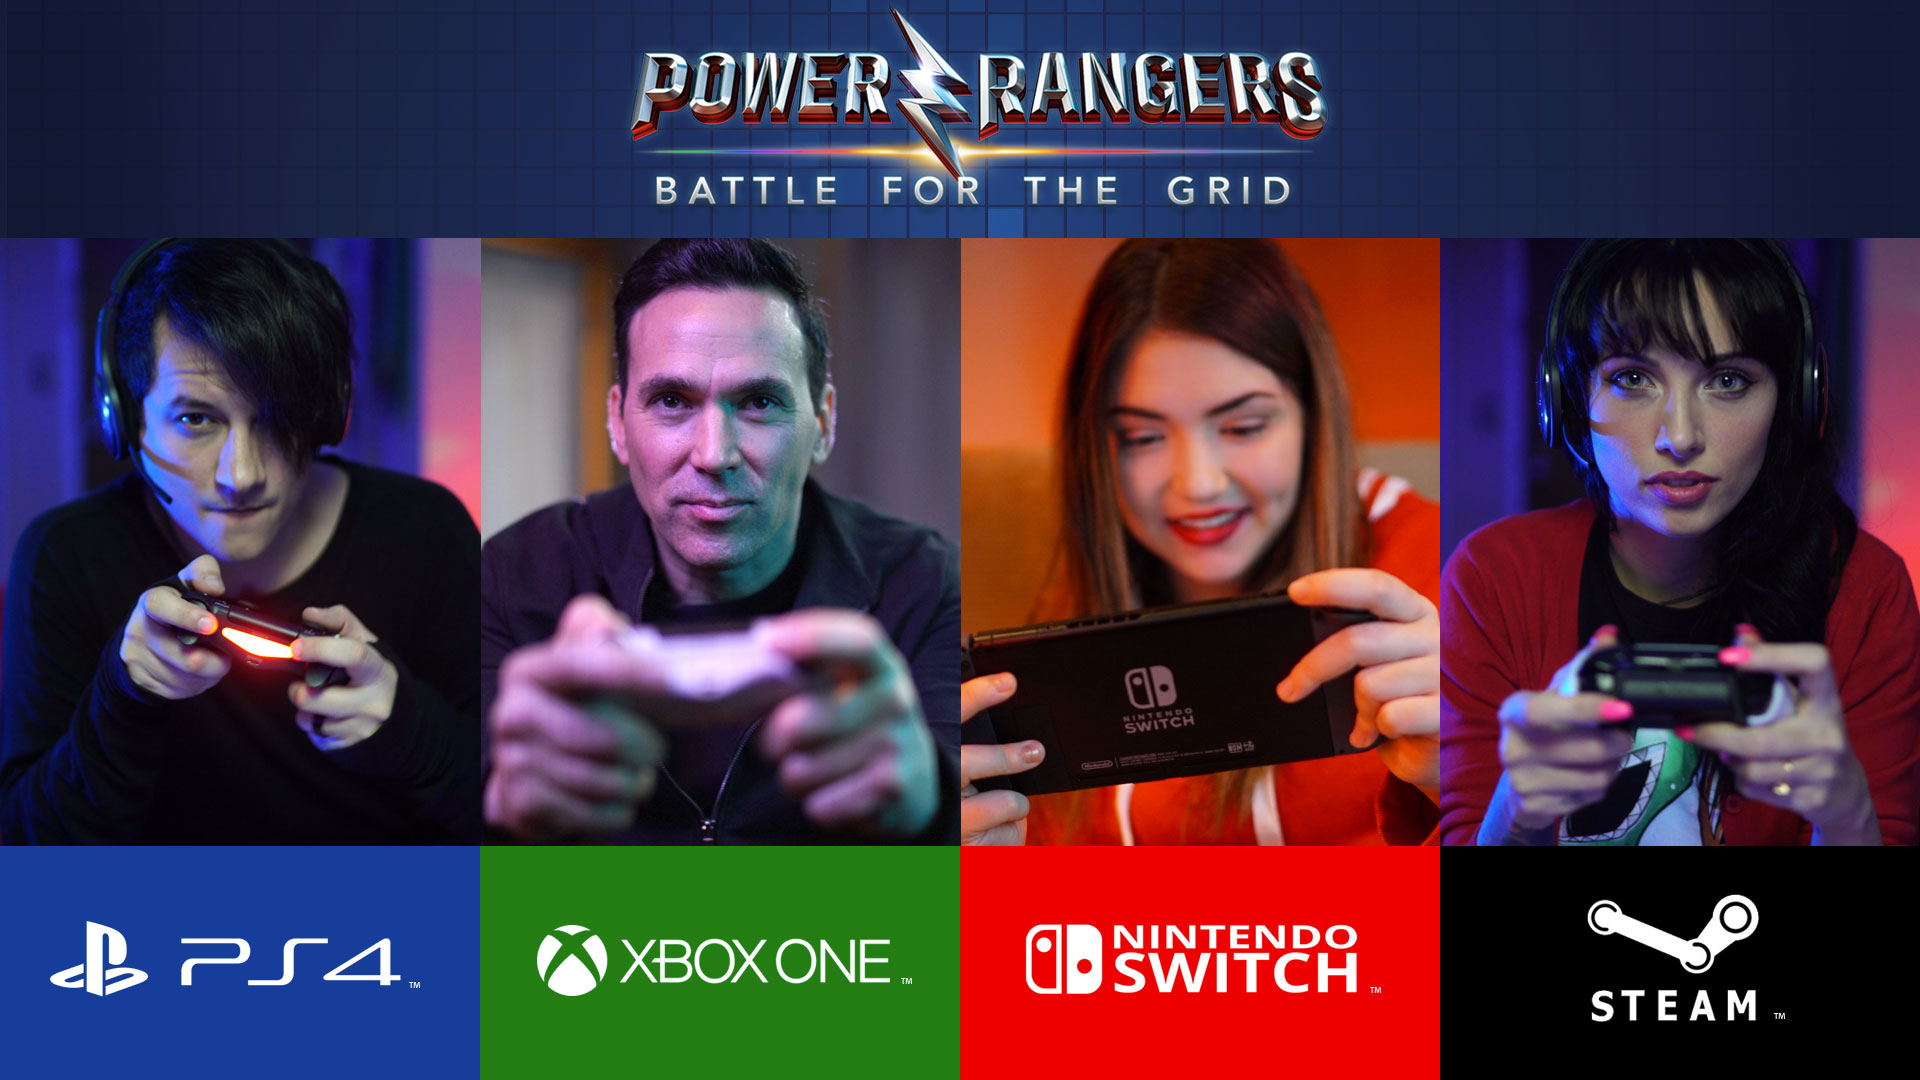 Power Rangers: Battle For The Grid screencap (nWay Games/Hasbro/Lionsgate)